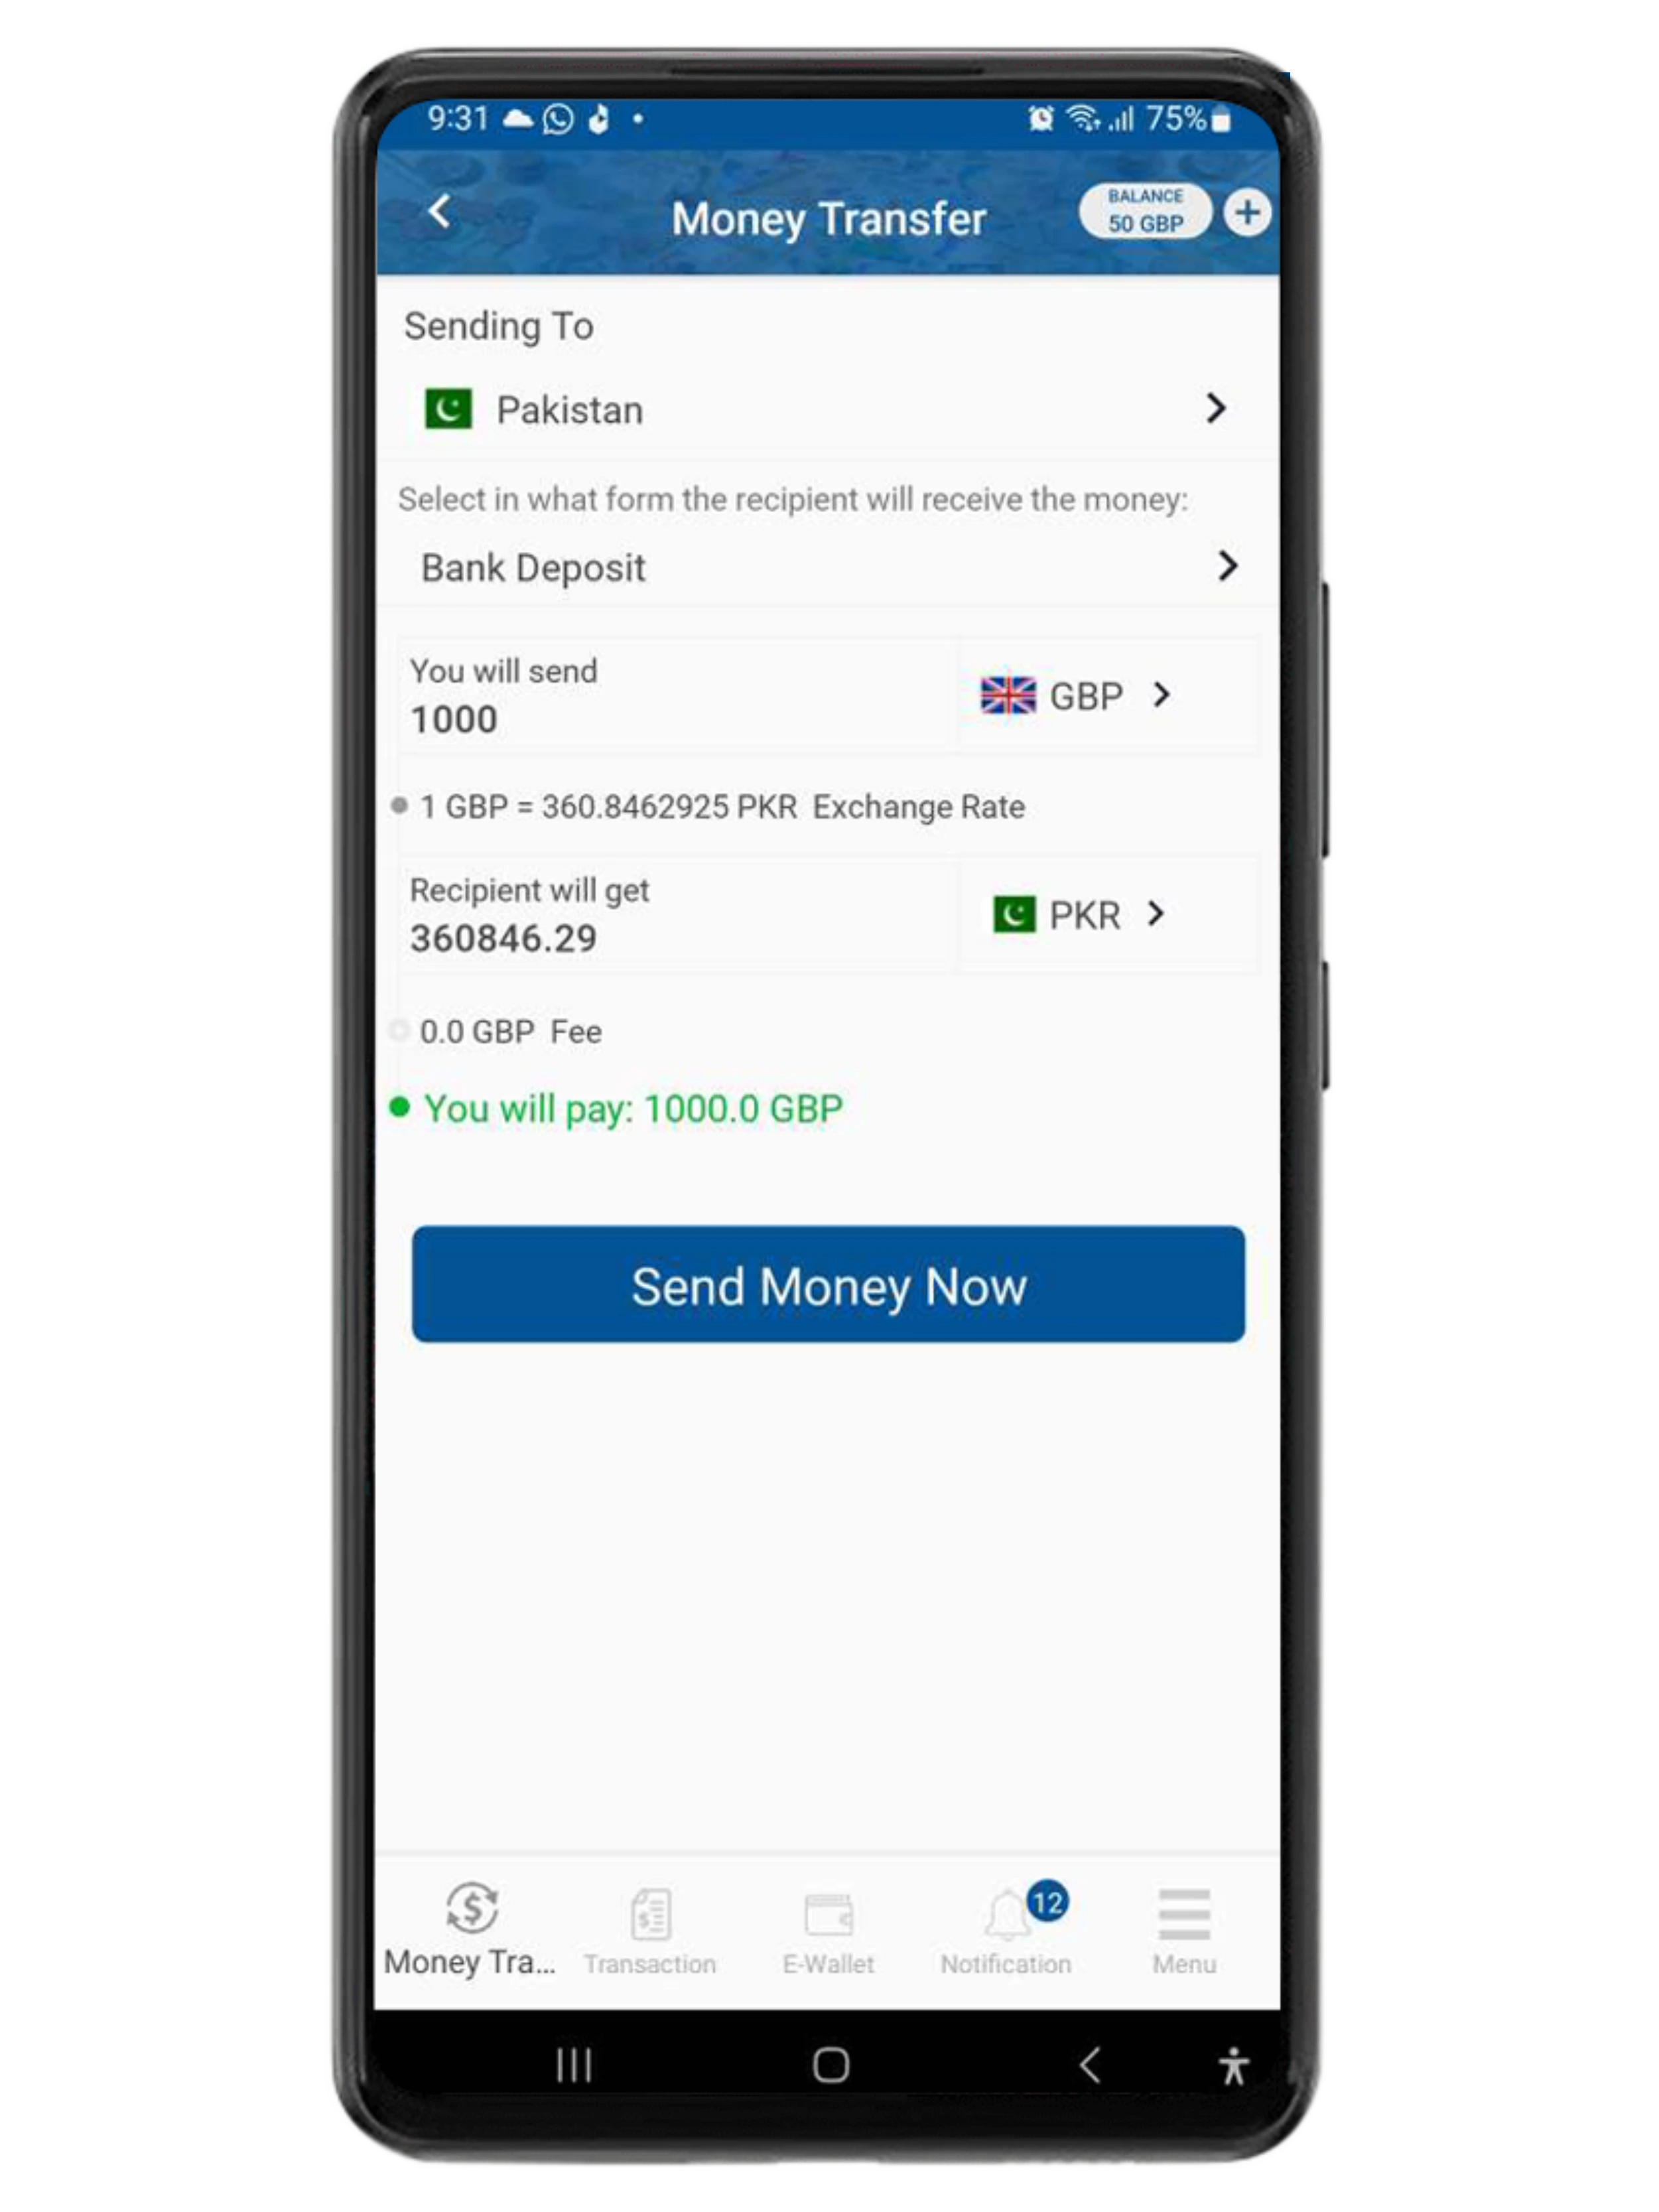 Simple Transfer Simple way to send and receive money